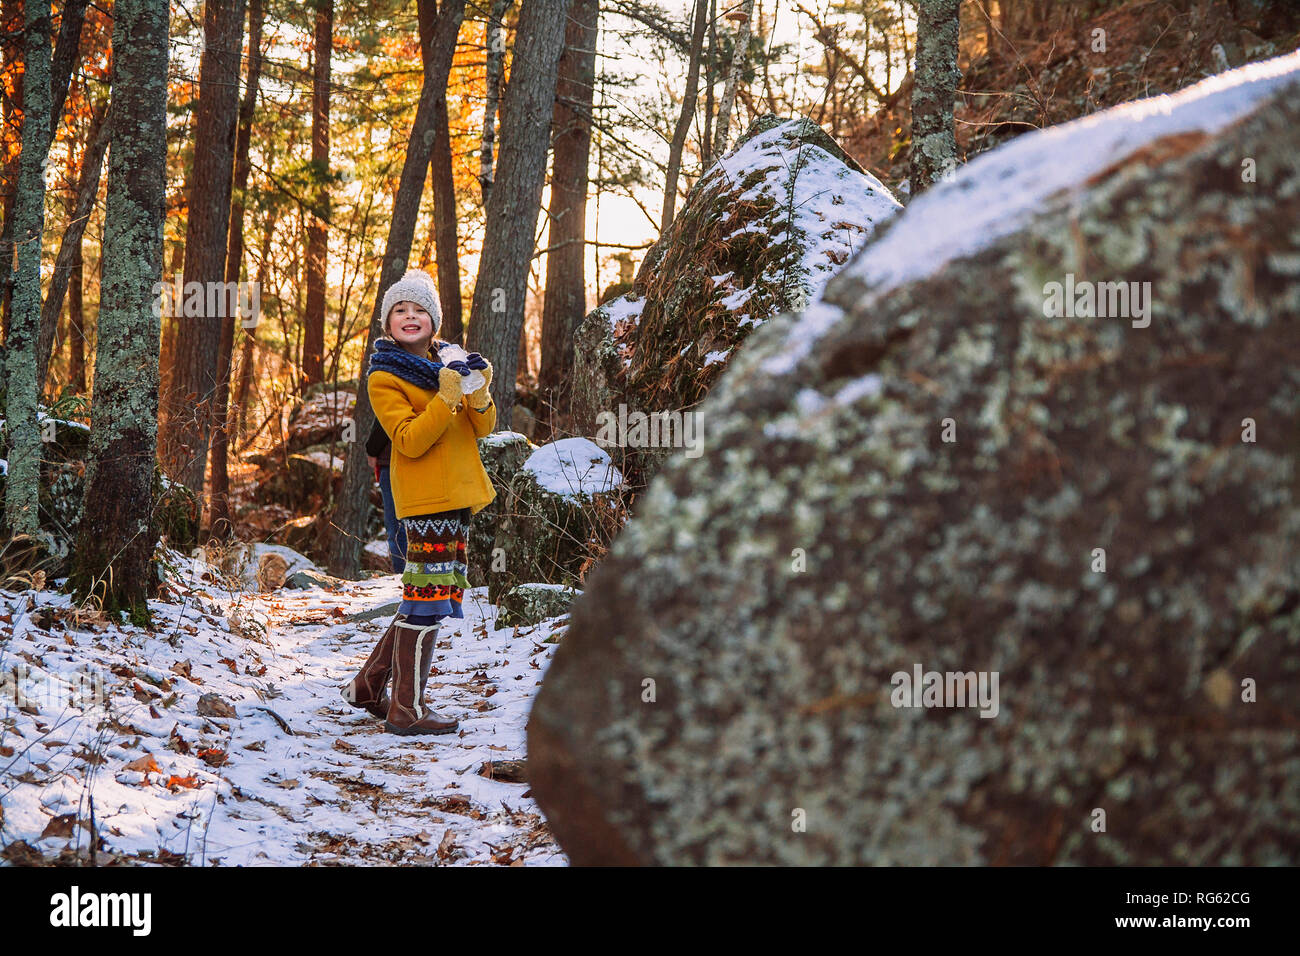 Smiling girl standing in forest holding a piece of frozen ice, United States Stock Photo